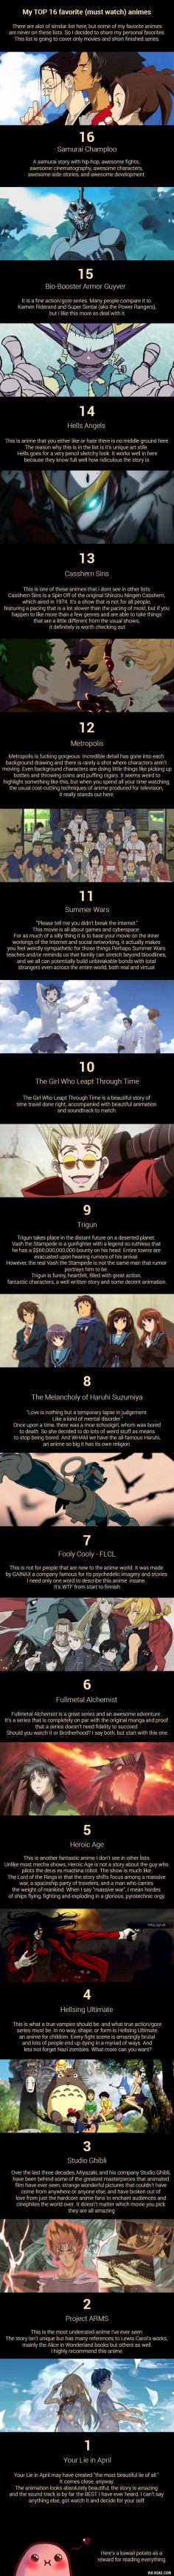 My top 16 must-watch anime list. With short reviews.